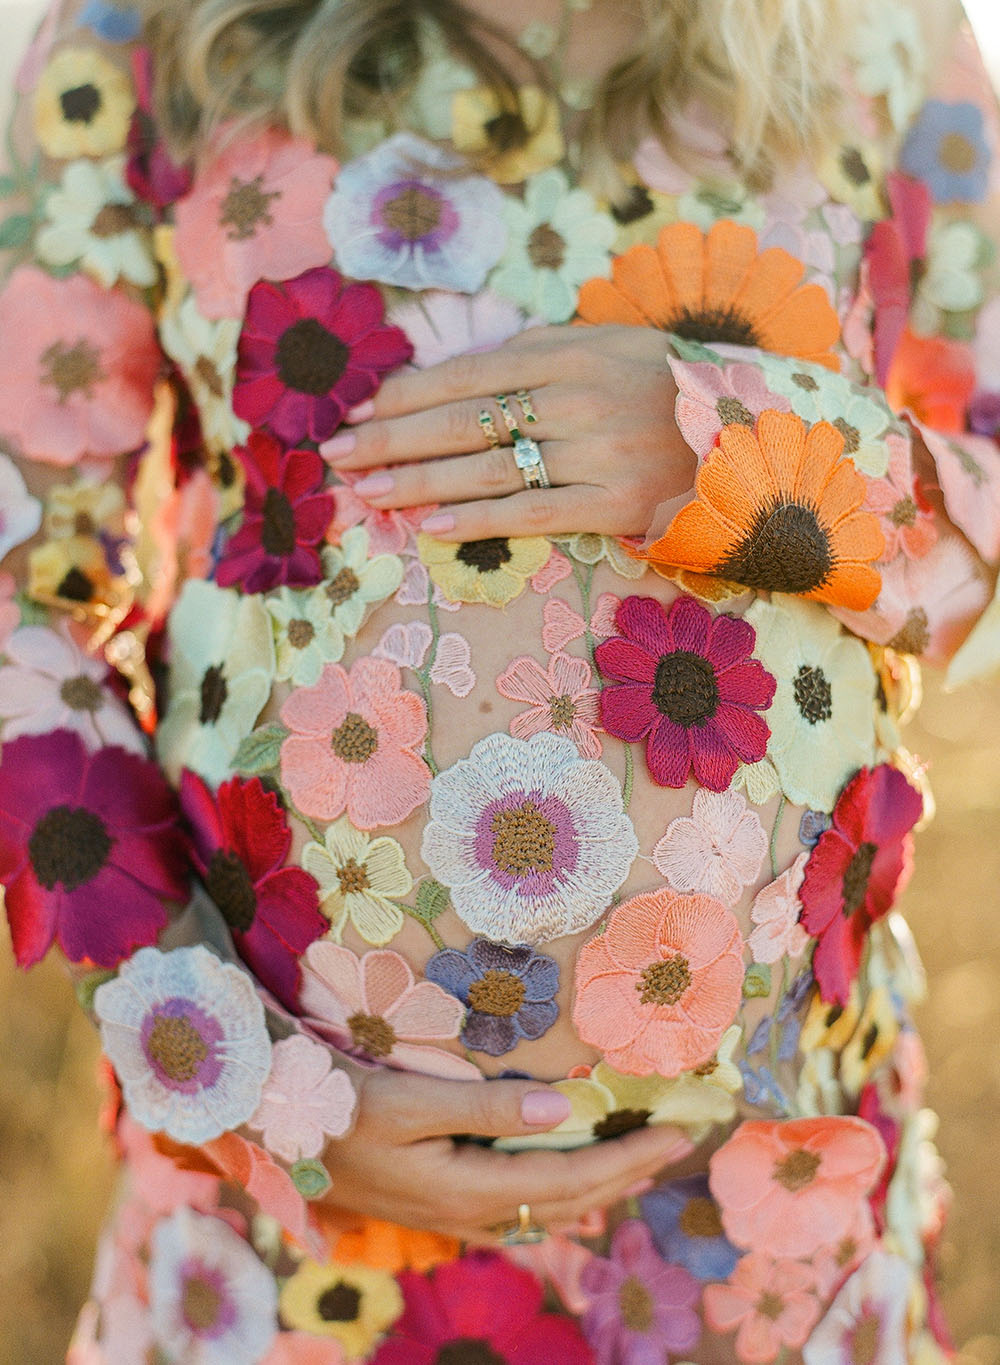 Floral Maternity Dress - maternity photoshoot, hand embroidered flowers, Torrey Fox, details